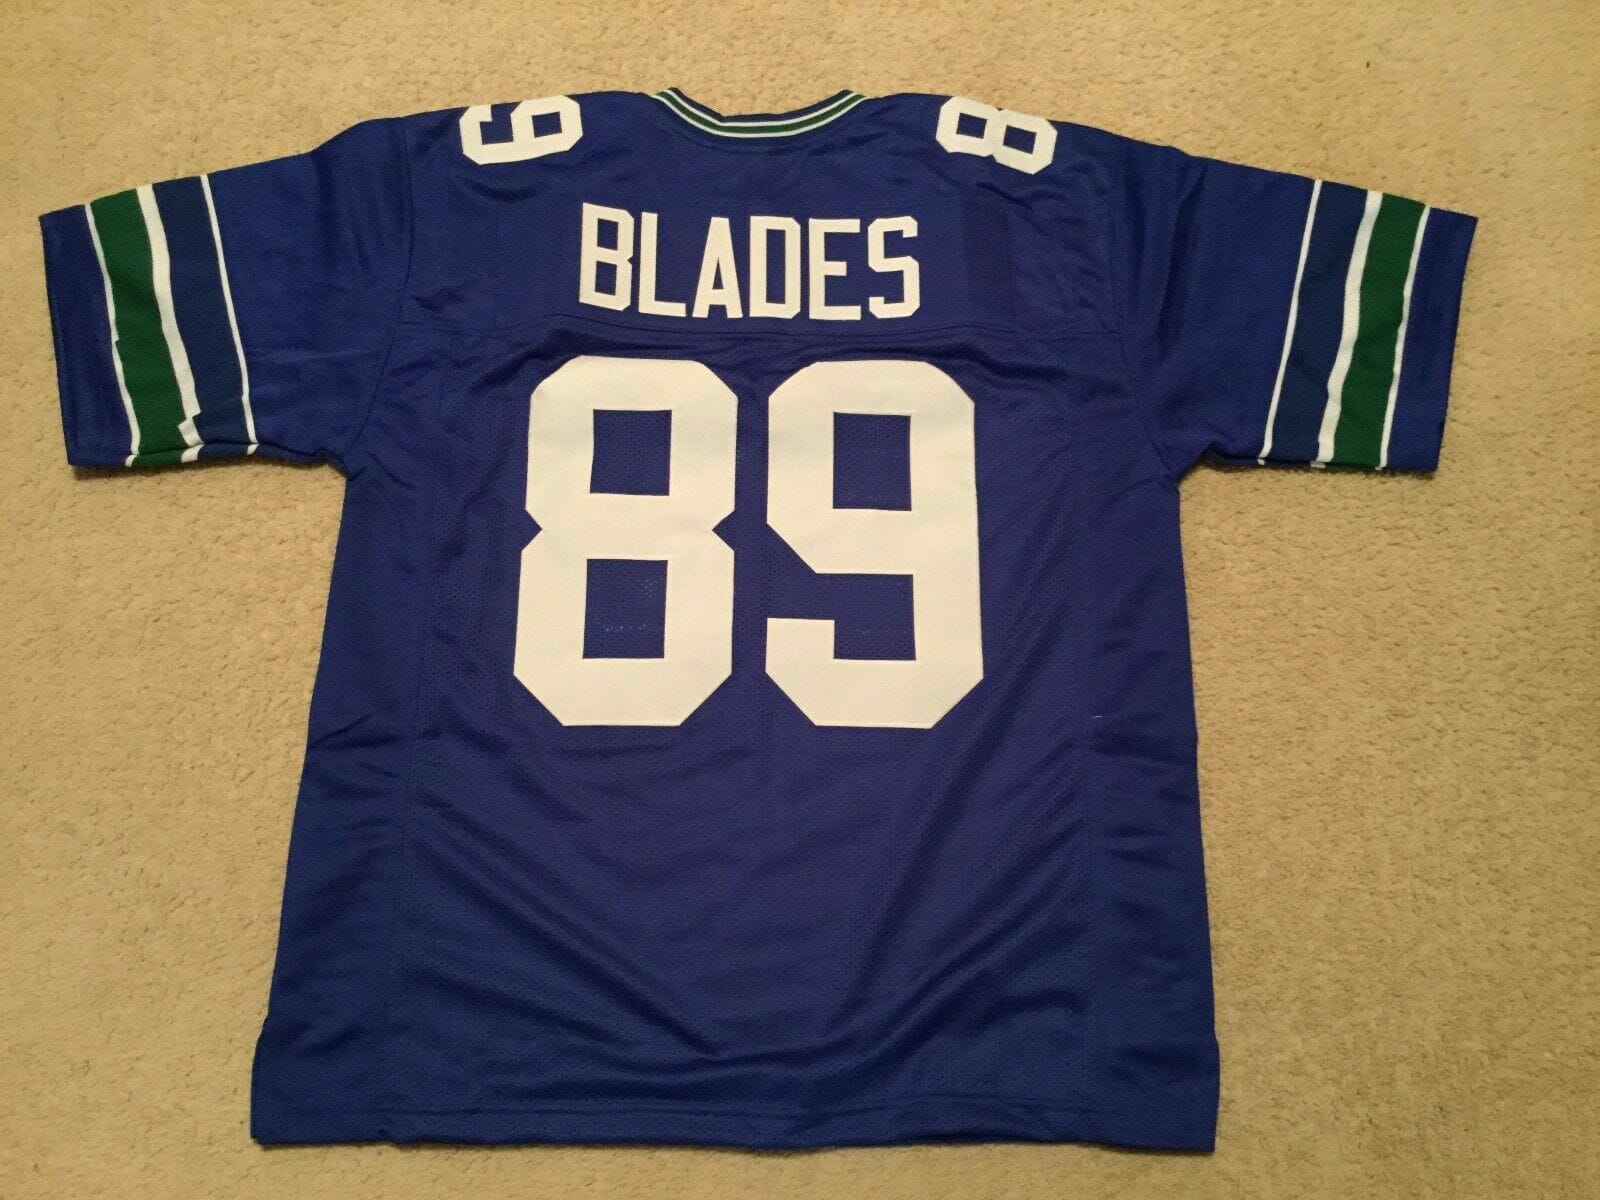 UNSIGNED CUSTOM Sewn Stitched Brian Blades Blue Jersey - Malcom Terry